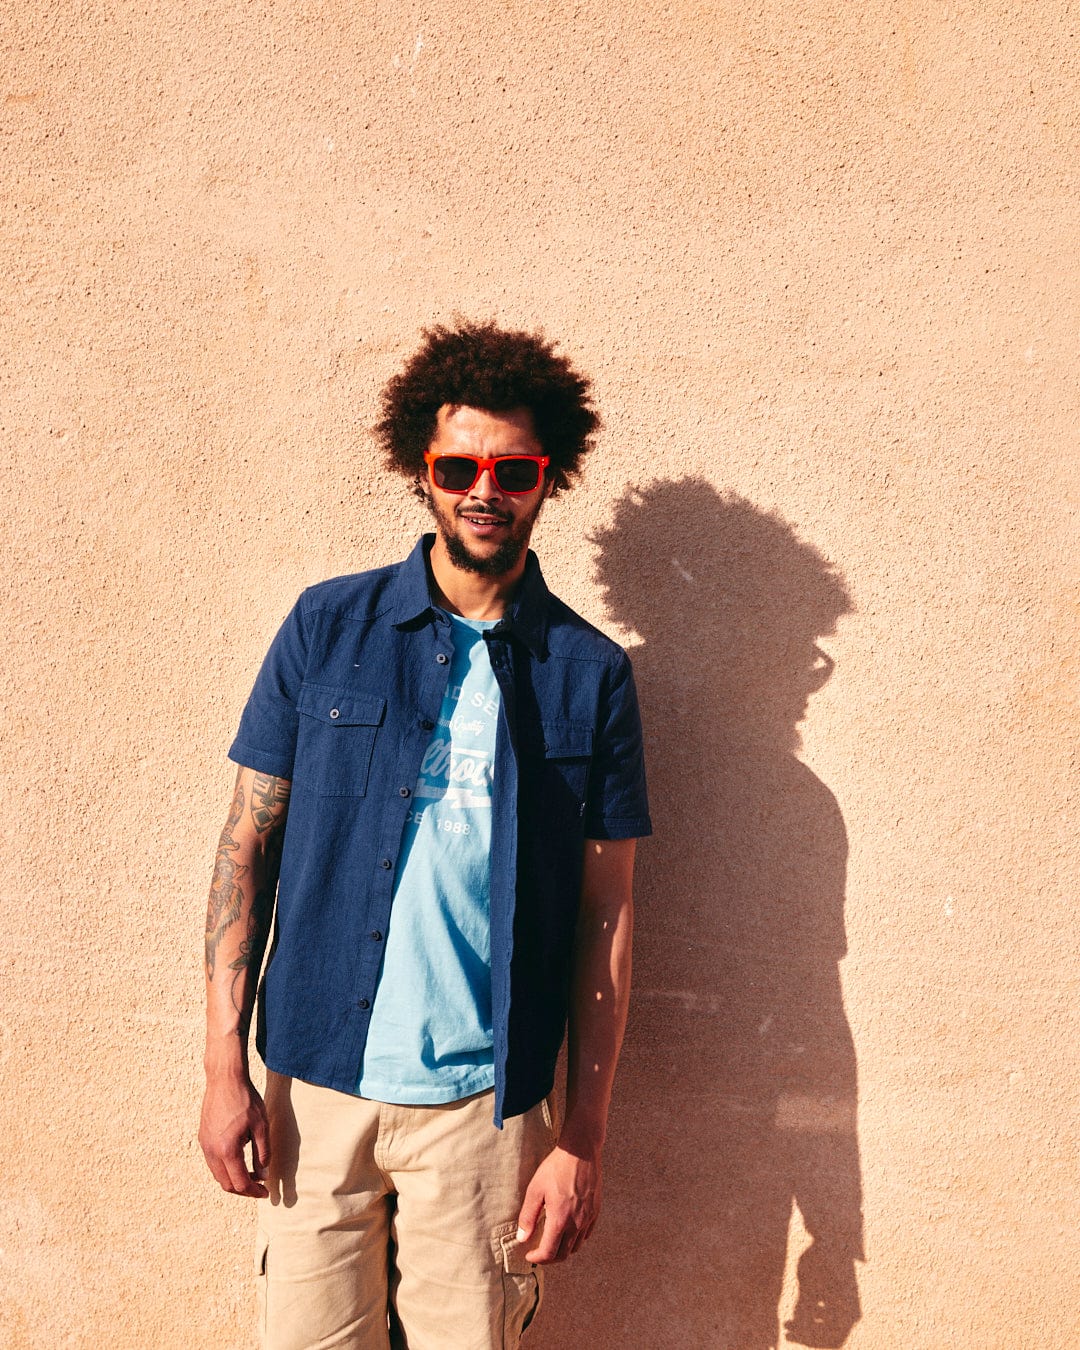 A man with curly hair wearing sunglasses and a Saltrock Polperro - Mens Short Sleeve Shirt in Blue stands against a light-colored wall, casting a shadow.